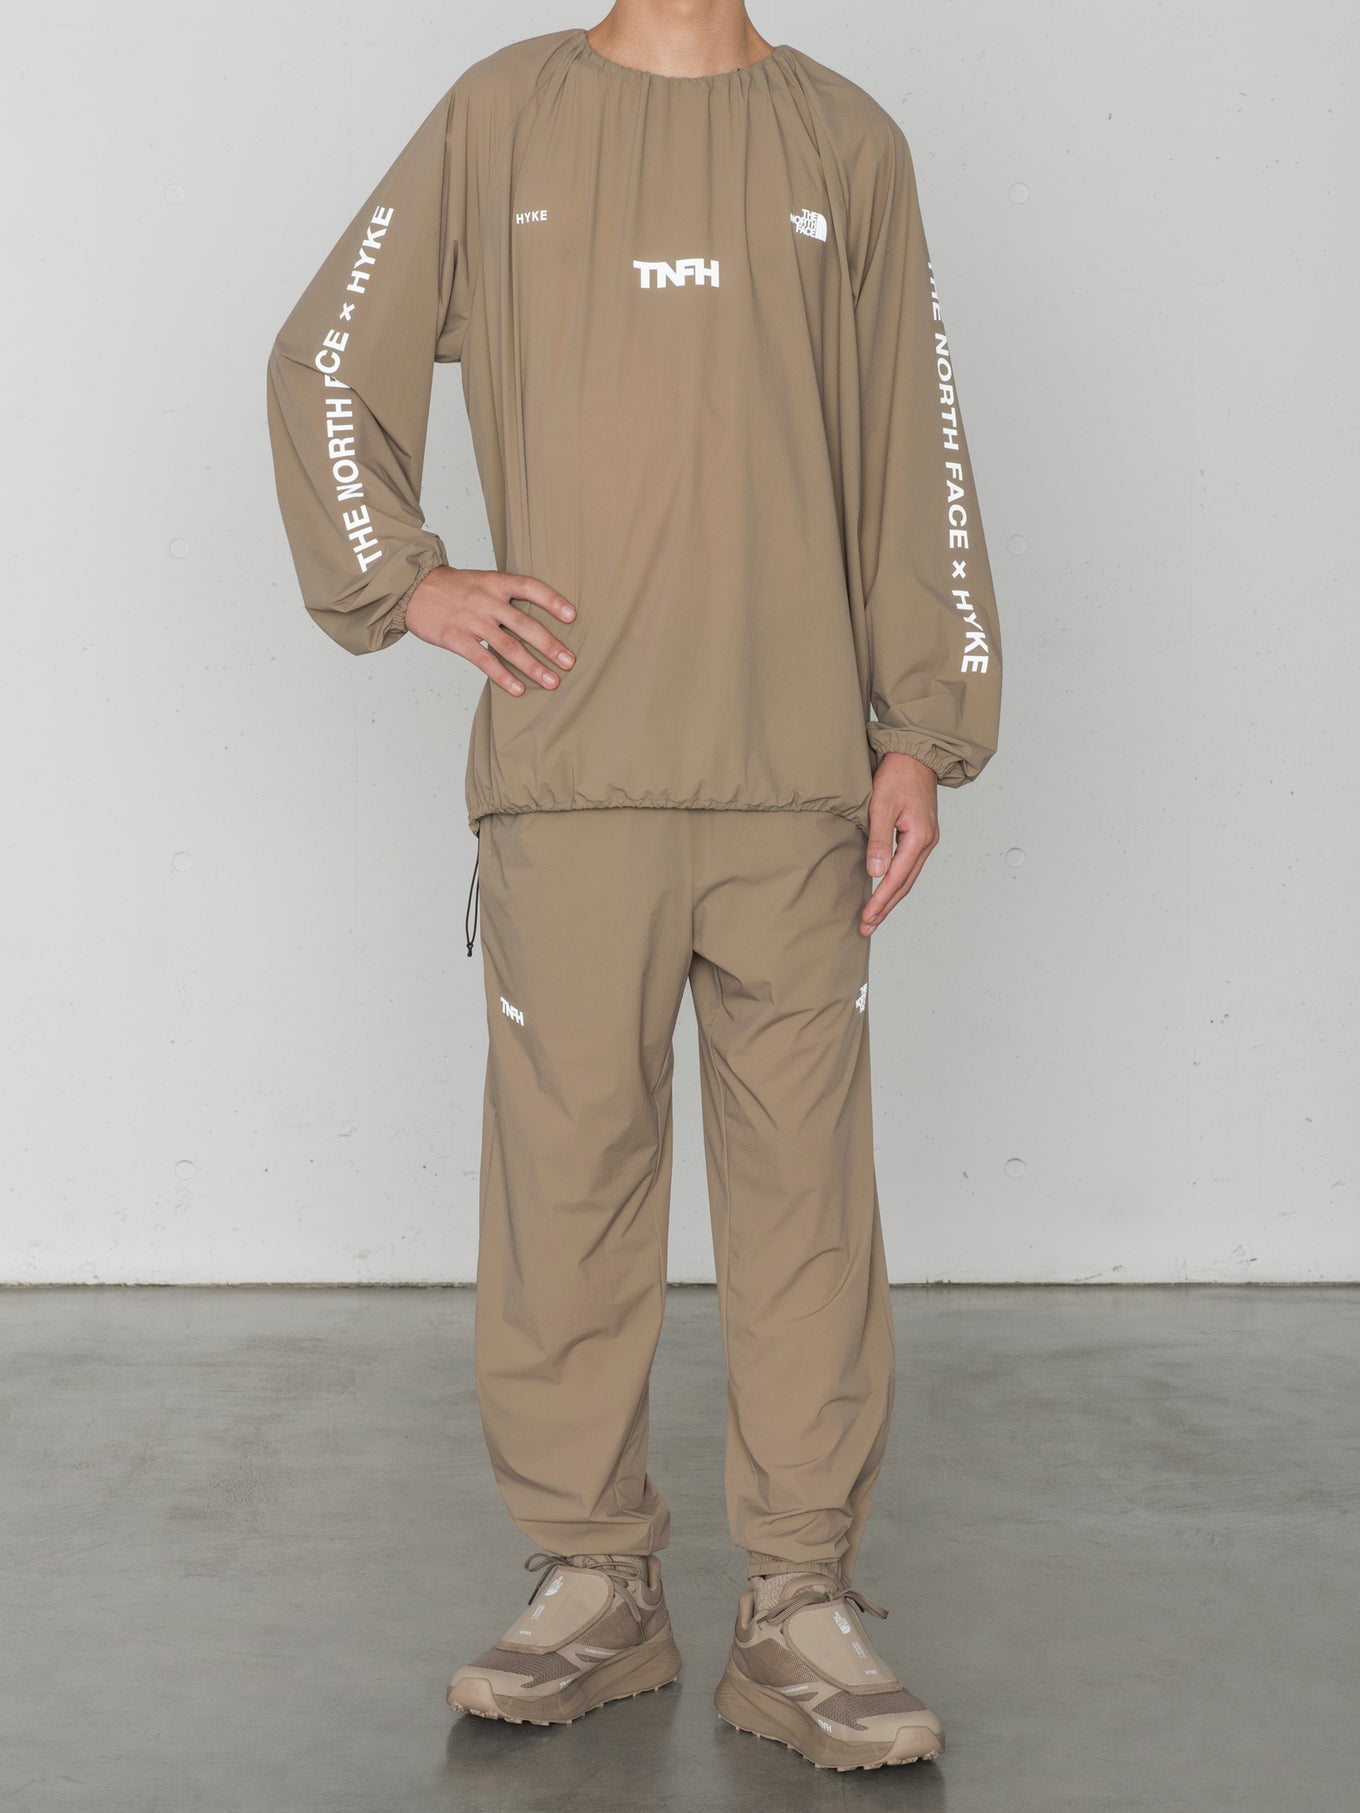 Trail Wind Pant (Mens)<br>TNFH  THE NORTH FACE × HYKE